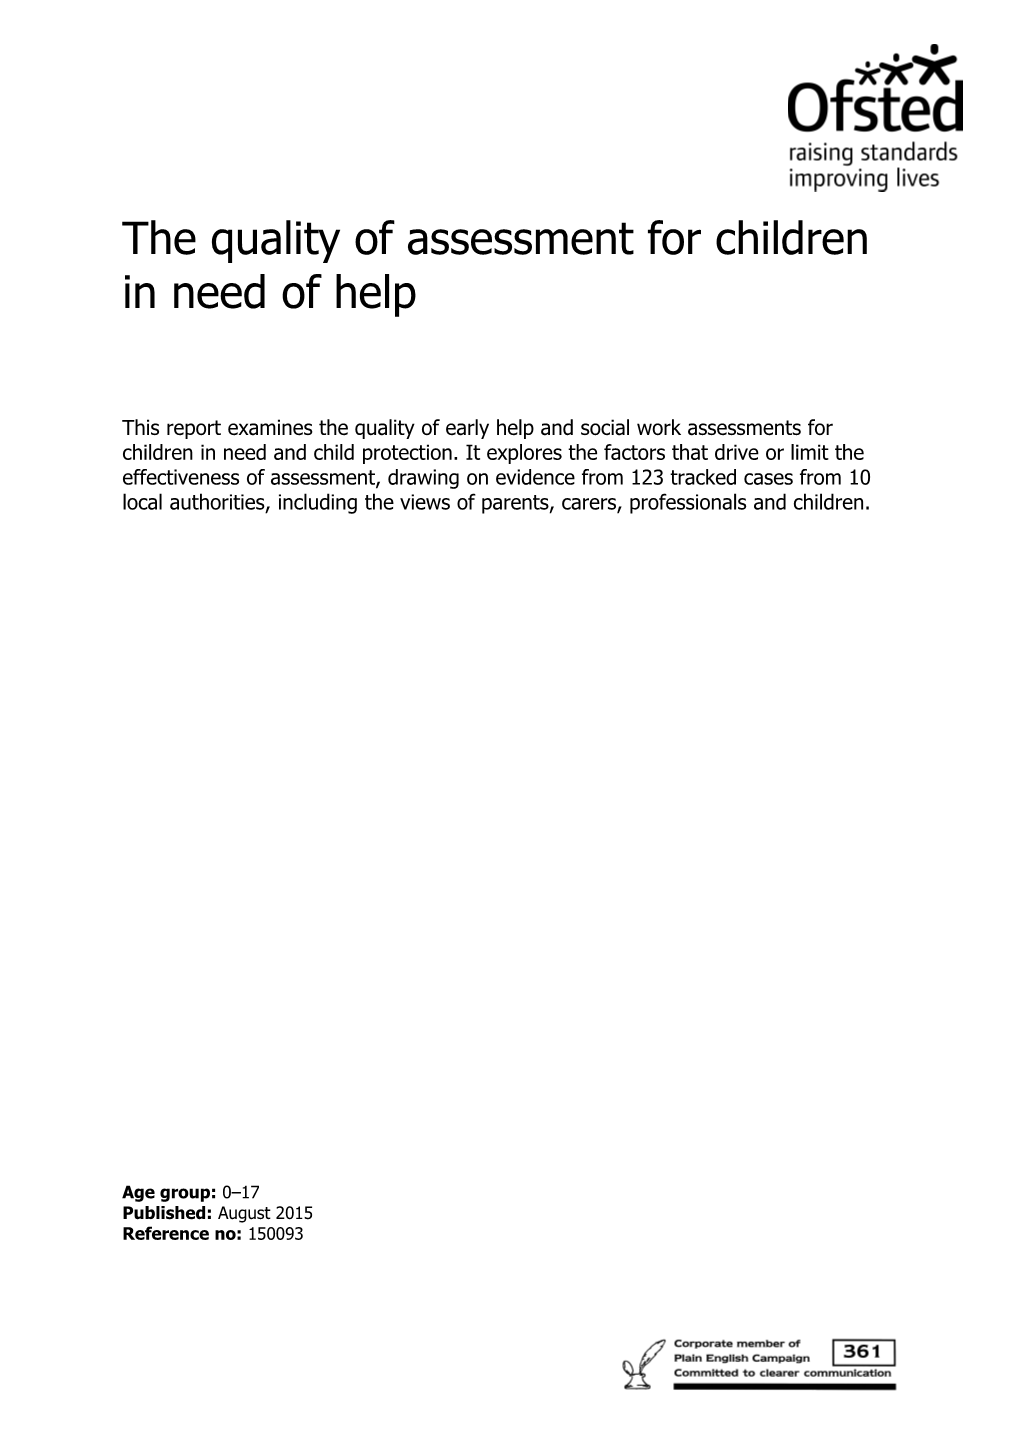 The Quality of Assessment for Children in Need of Help